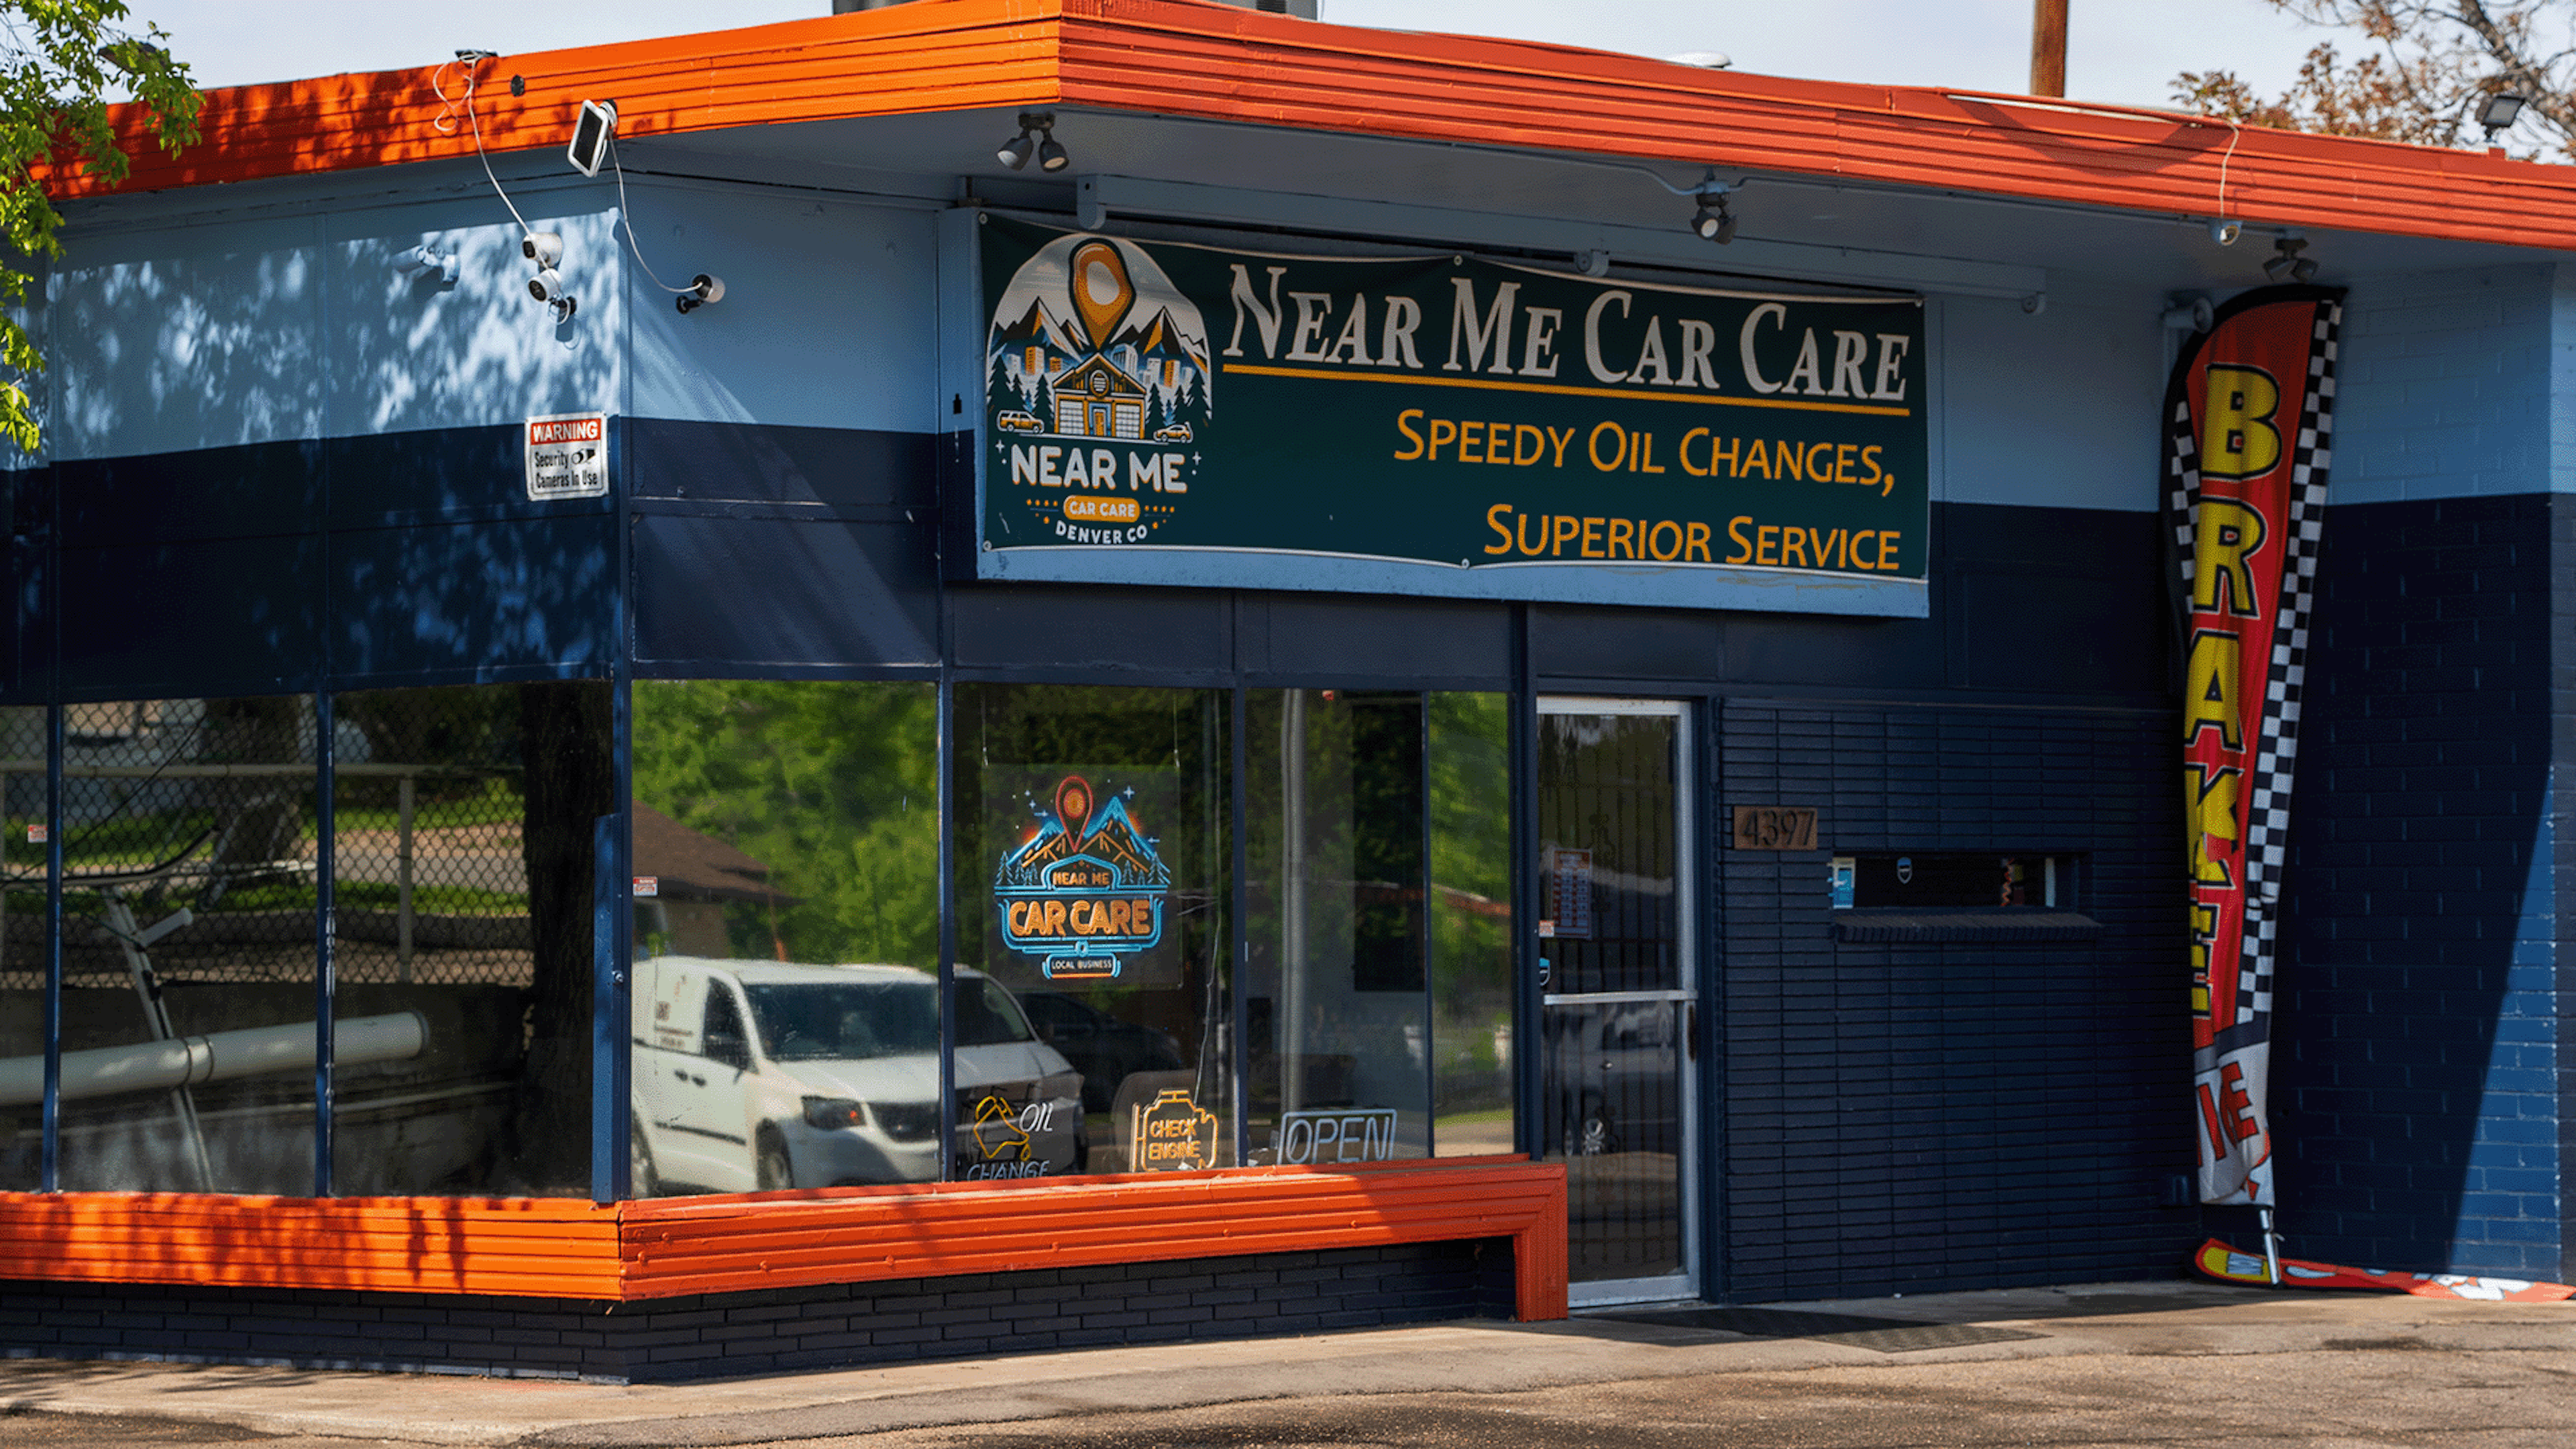 Near Me Car Care - Your Trusted Auto Repair Partner